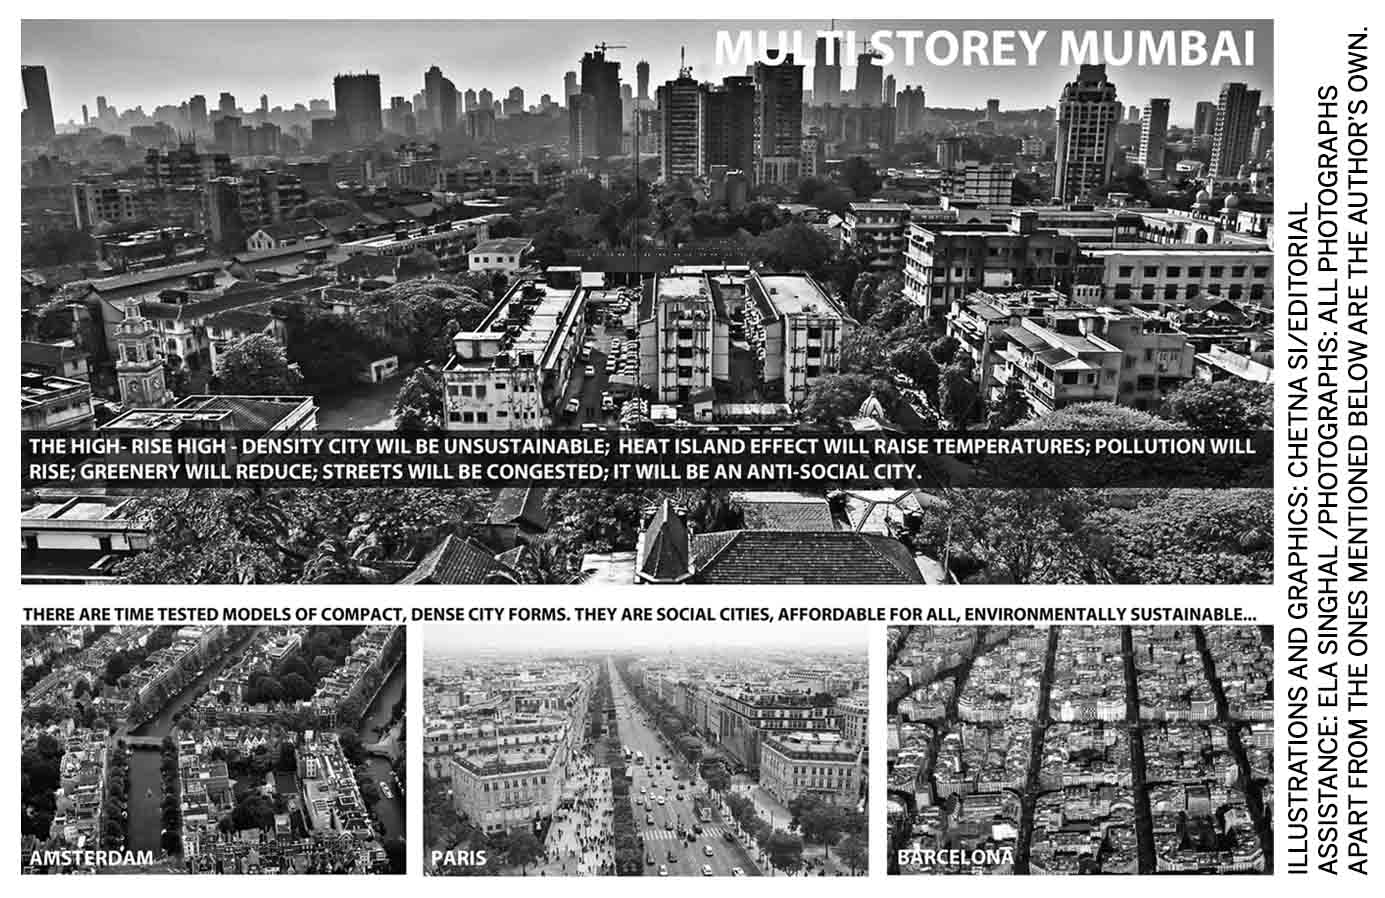 breaking-vicious-cycle-recovering-citizen-delhi-present-wilderness-mumbai-multi-storey-high-rise-density-city-unsustainable-heat-island-raise-temperature-pollution-greenery-reduce-streets-congested-anti-social-time-tested-models-compact-dense-forms-social-affordable-environmental-sustainable-amsterdam-paris-barcelona